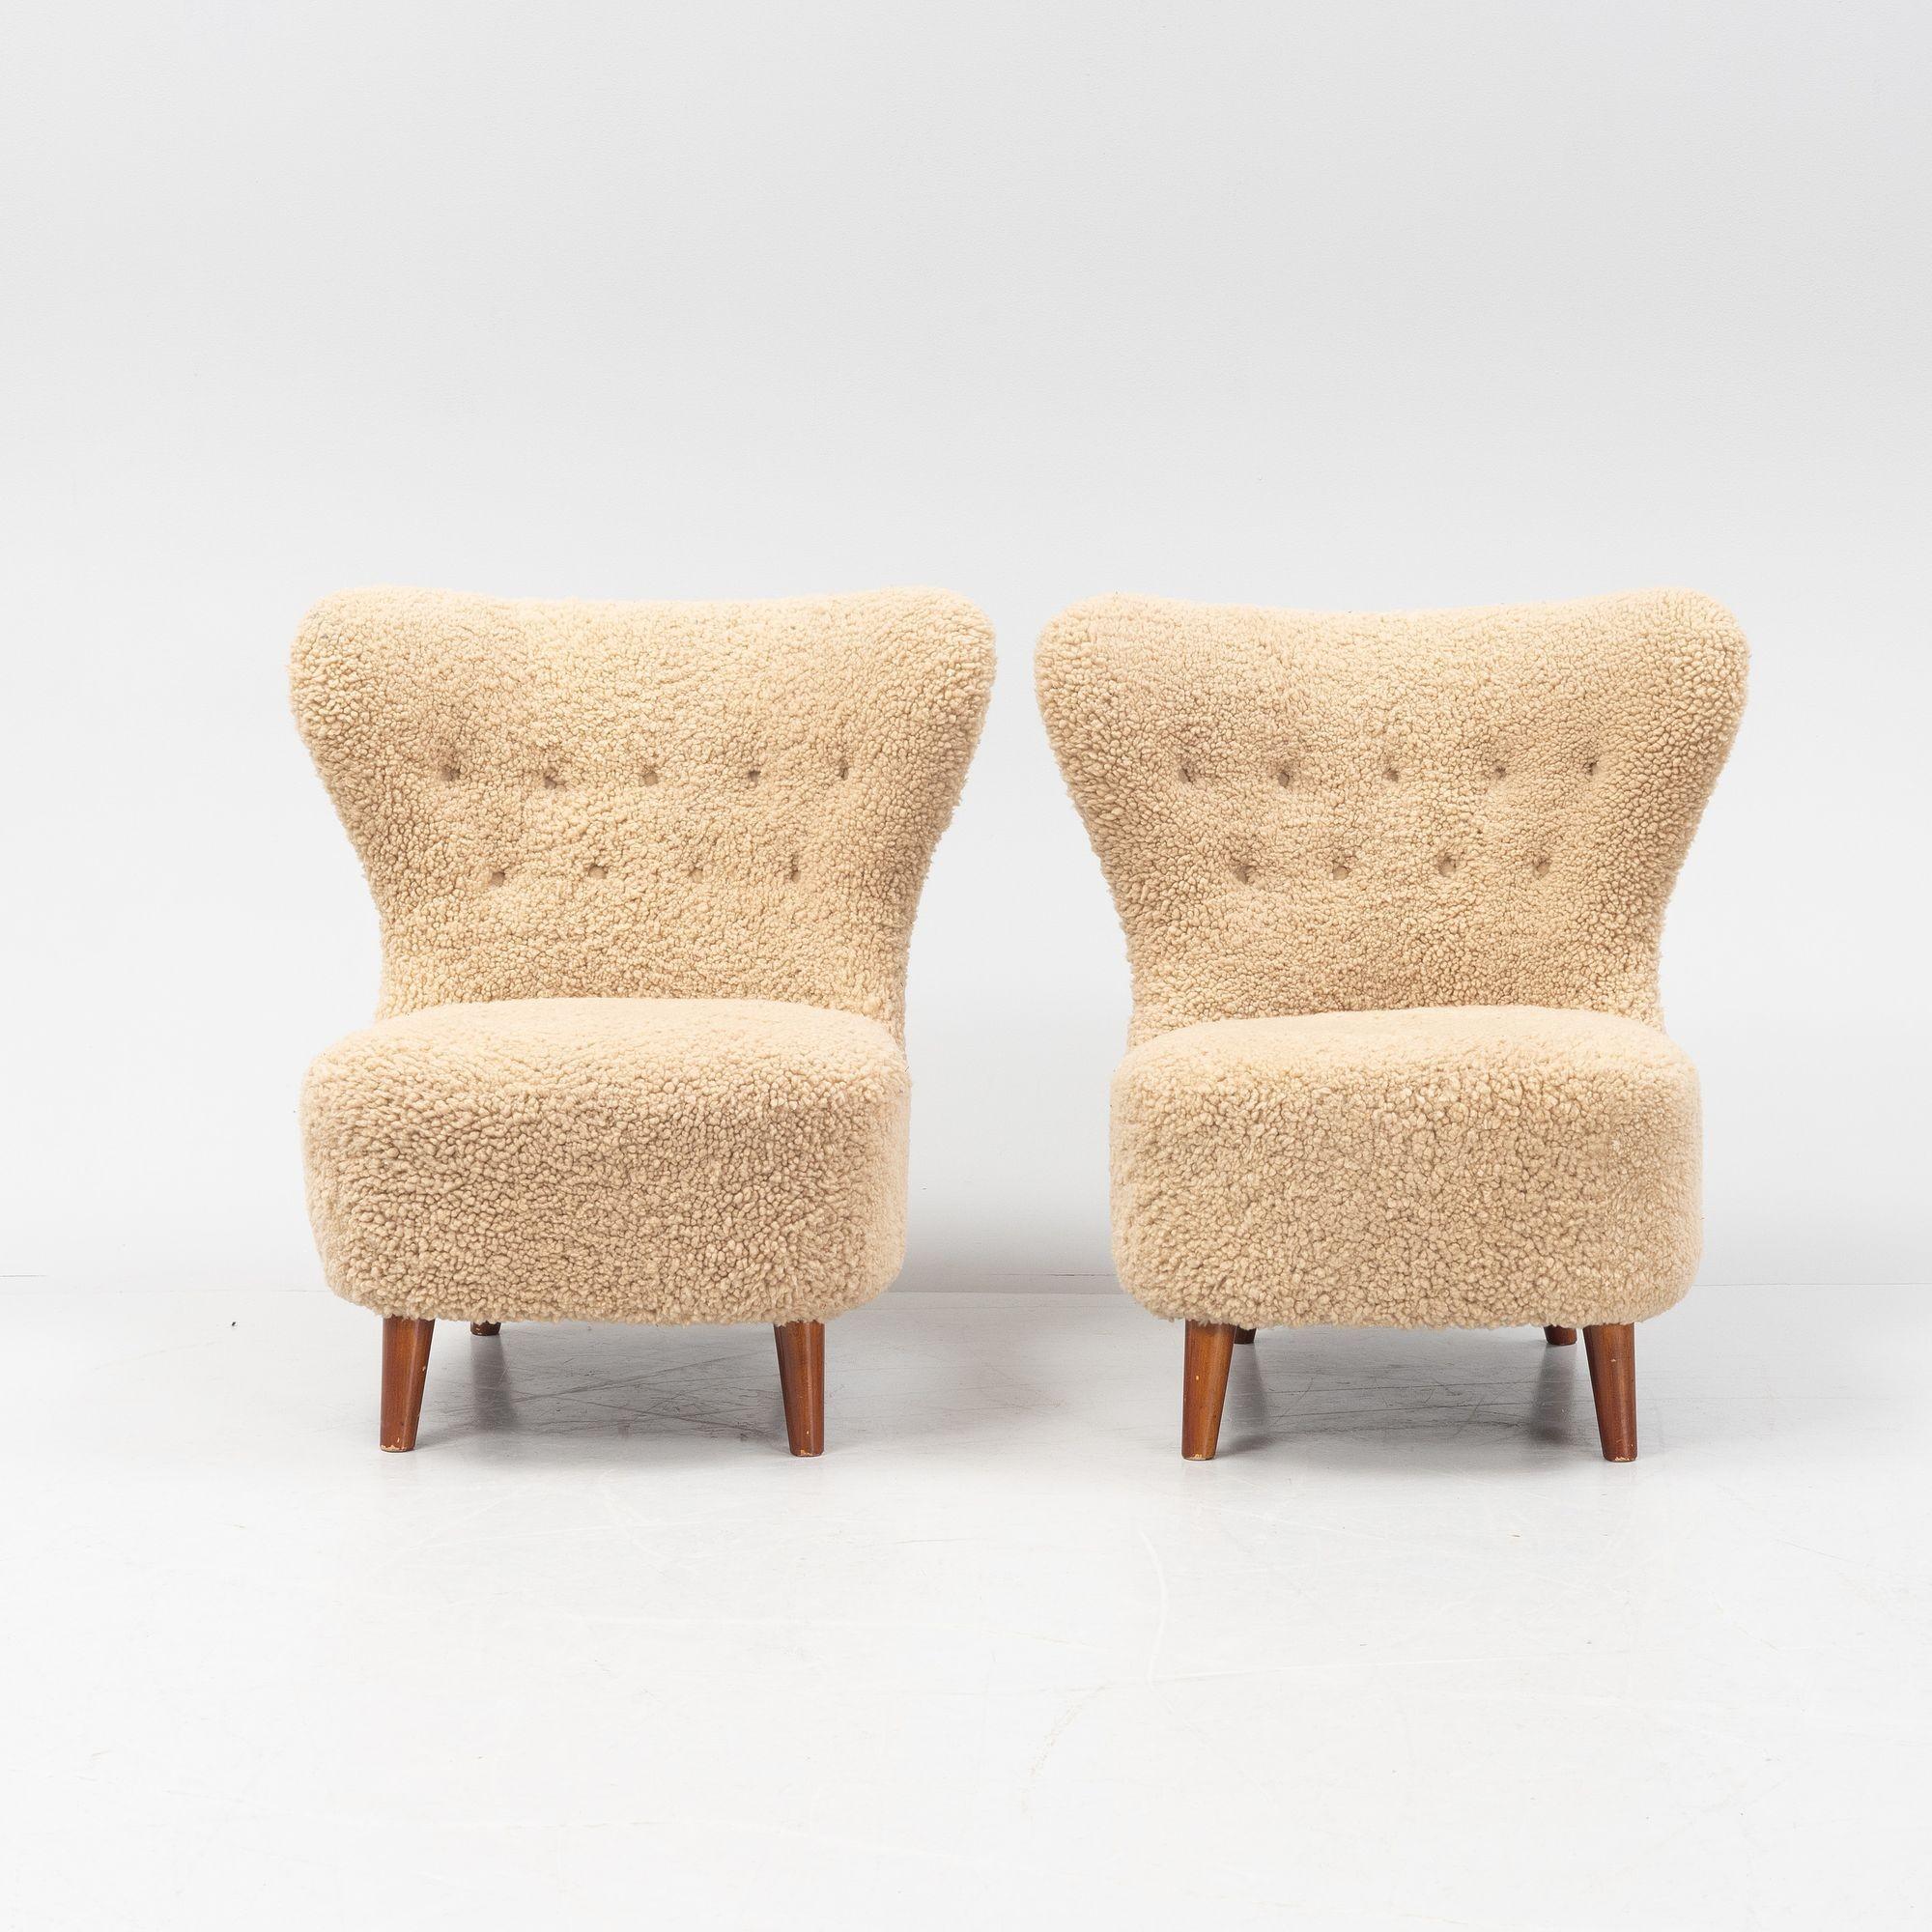 Chic low-profile Danish cabinet maker lounge chairs in a later genuine sheepskin upholstery. These gorgeous chairs feature a tufted modernist form back and a chunky base, all sitting on four lacquered beech legs. These pieces are solid in form and